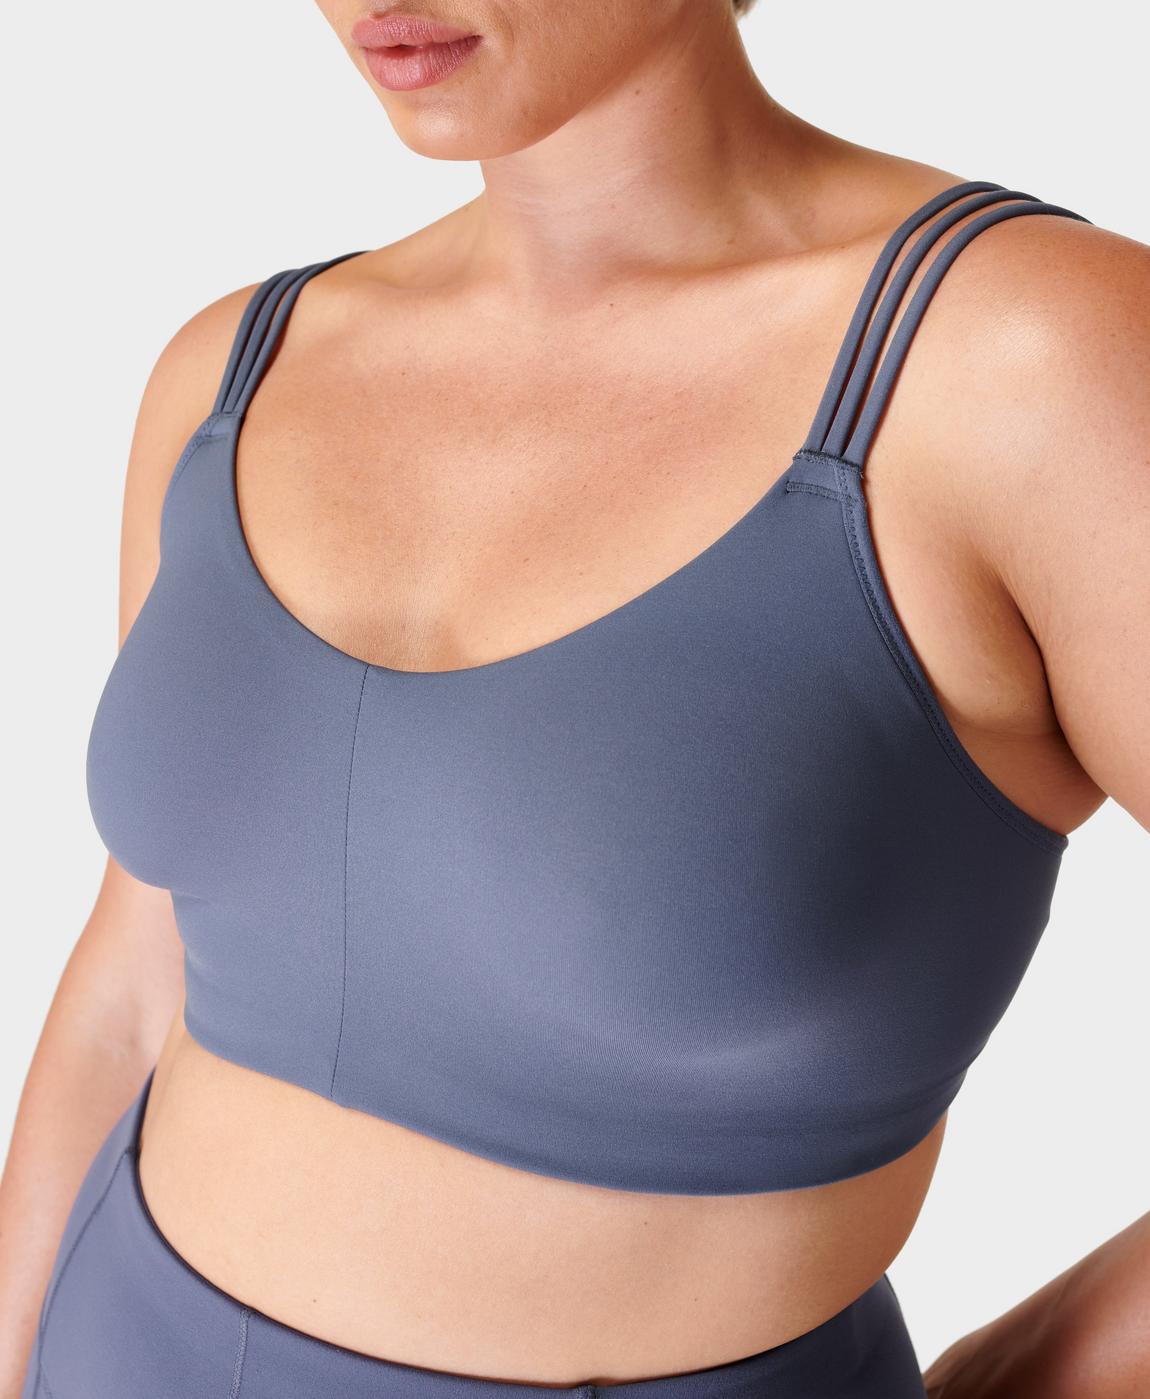 Everyday Yoga Wholesome Solid Sports Bra at YogaOutlet.com